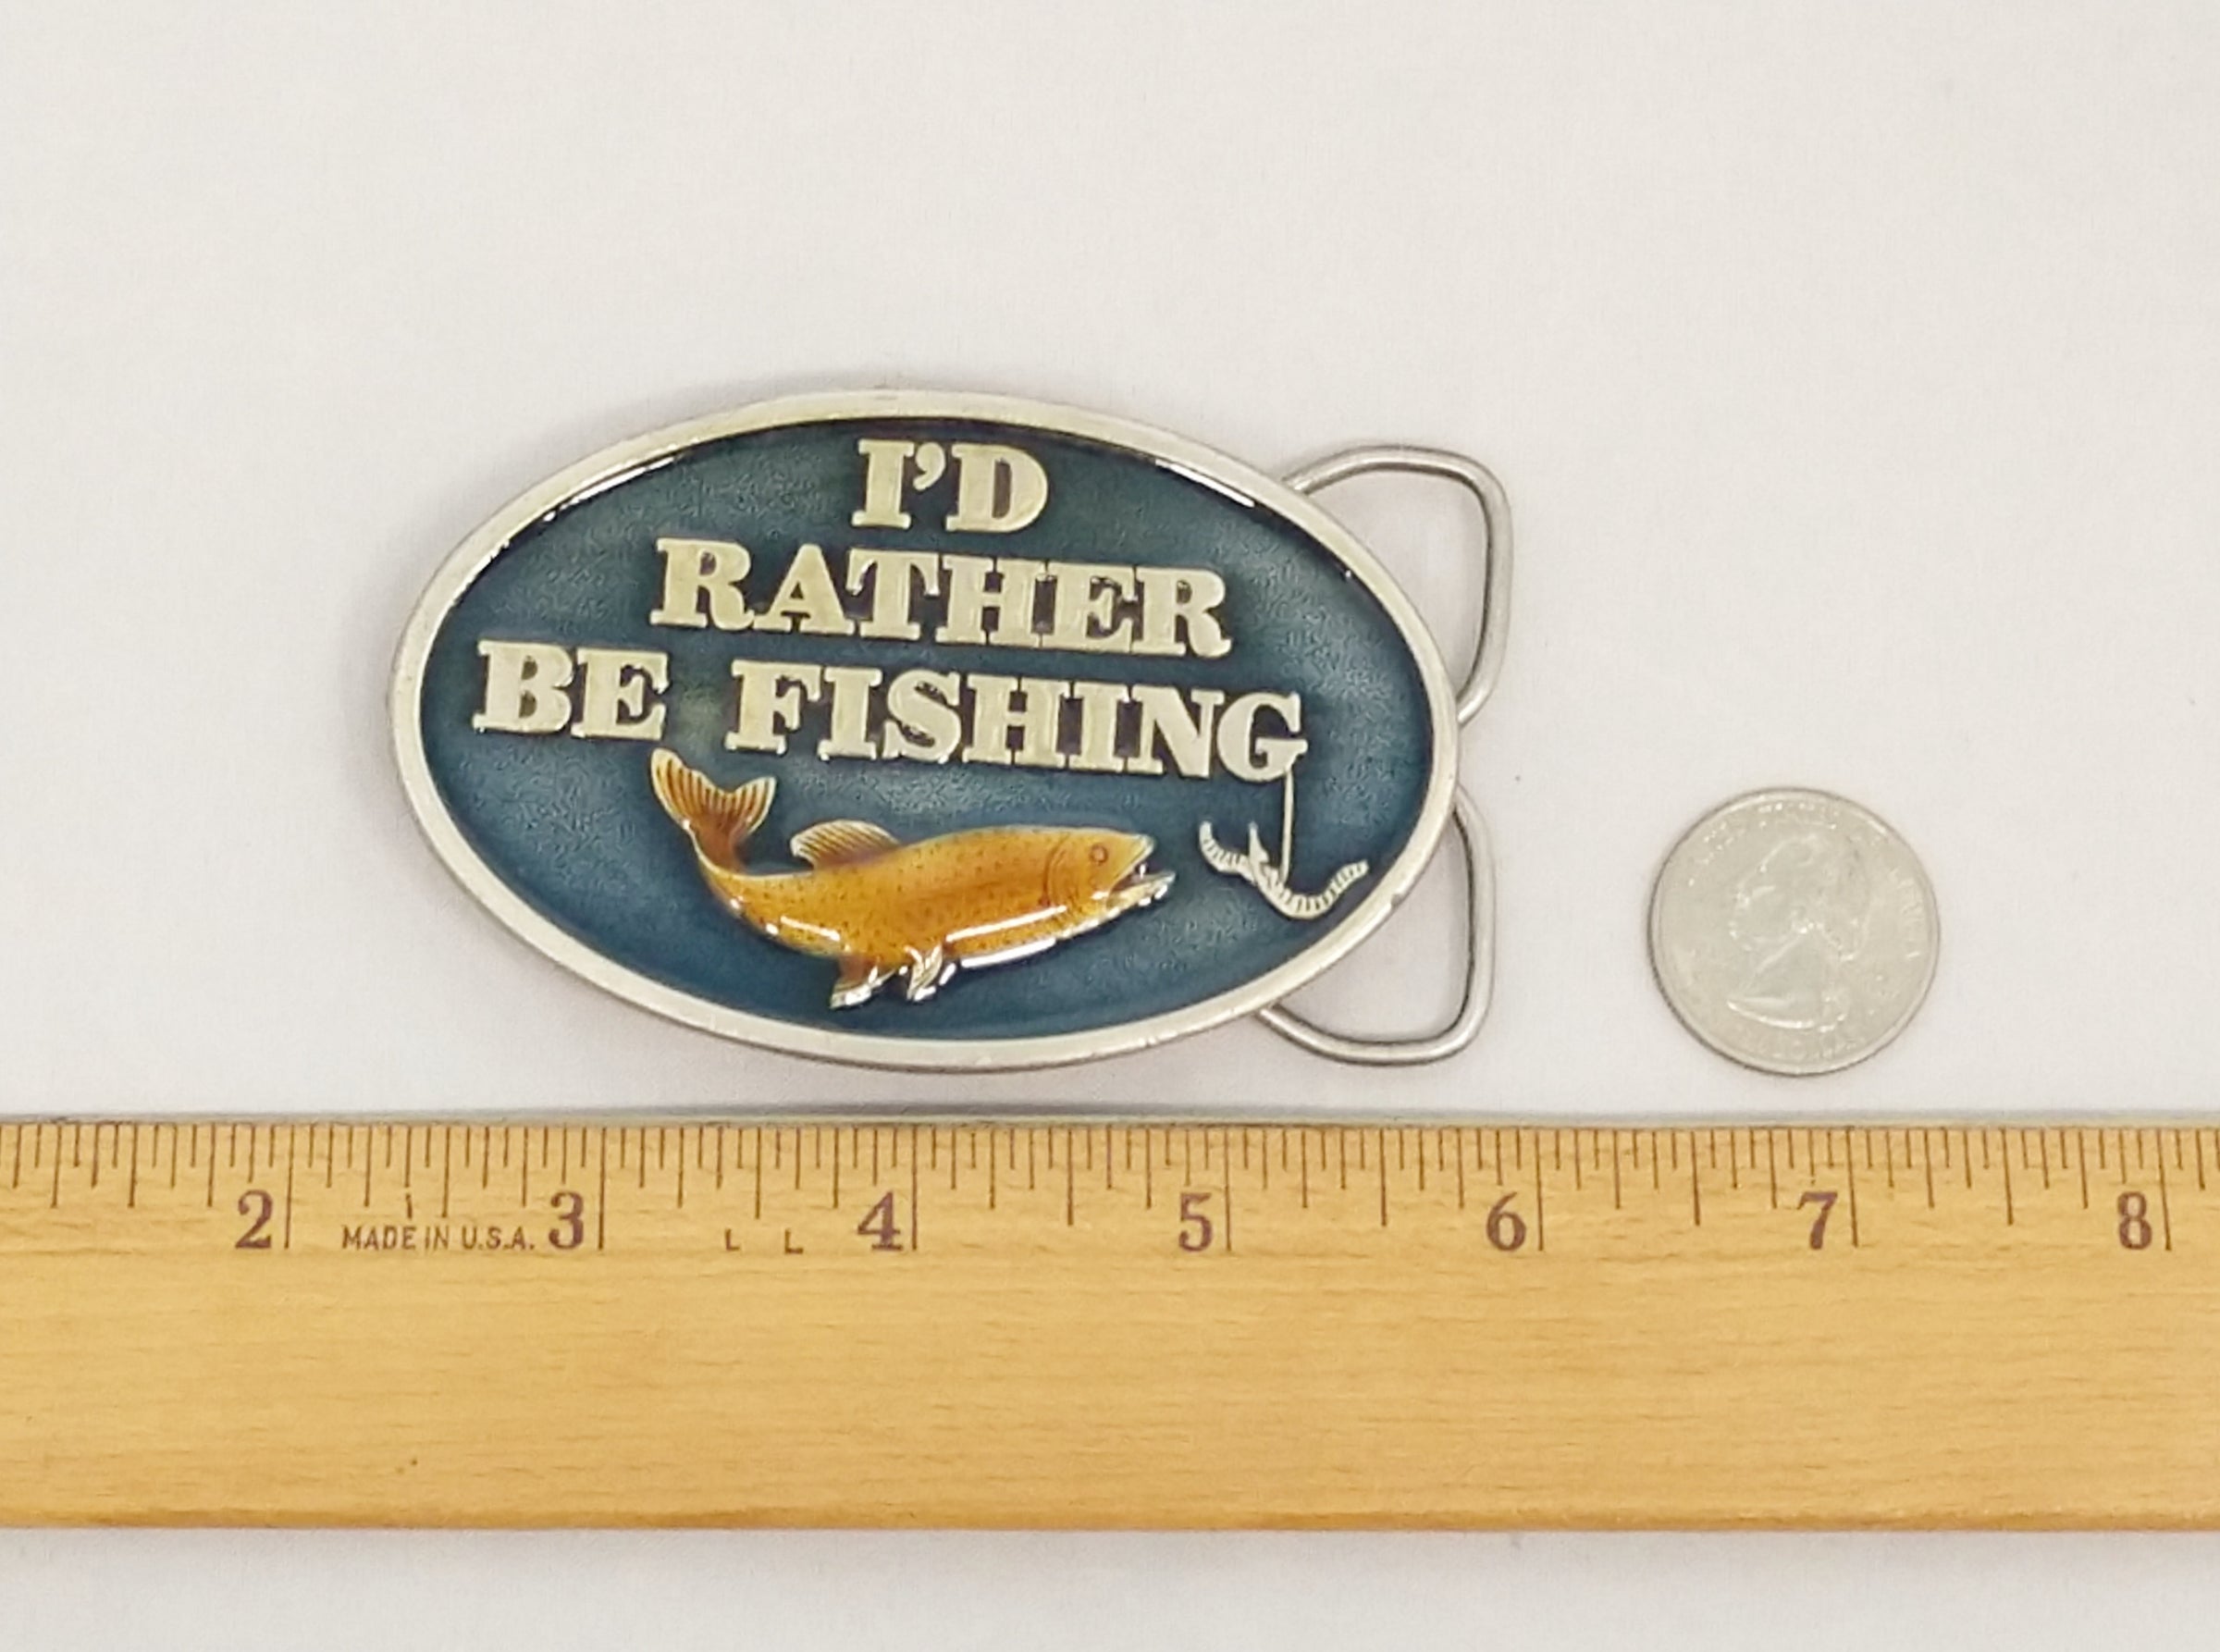 Hers and His Treasures 1978 I'd Rather Be Fishing Enamel Belt Buckle